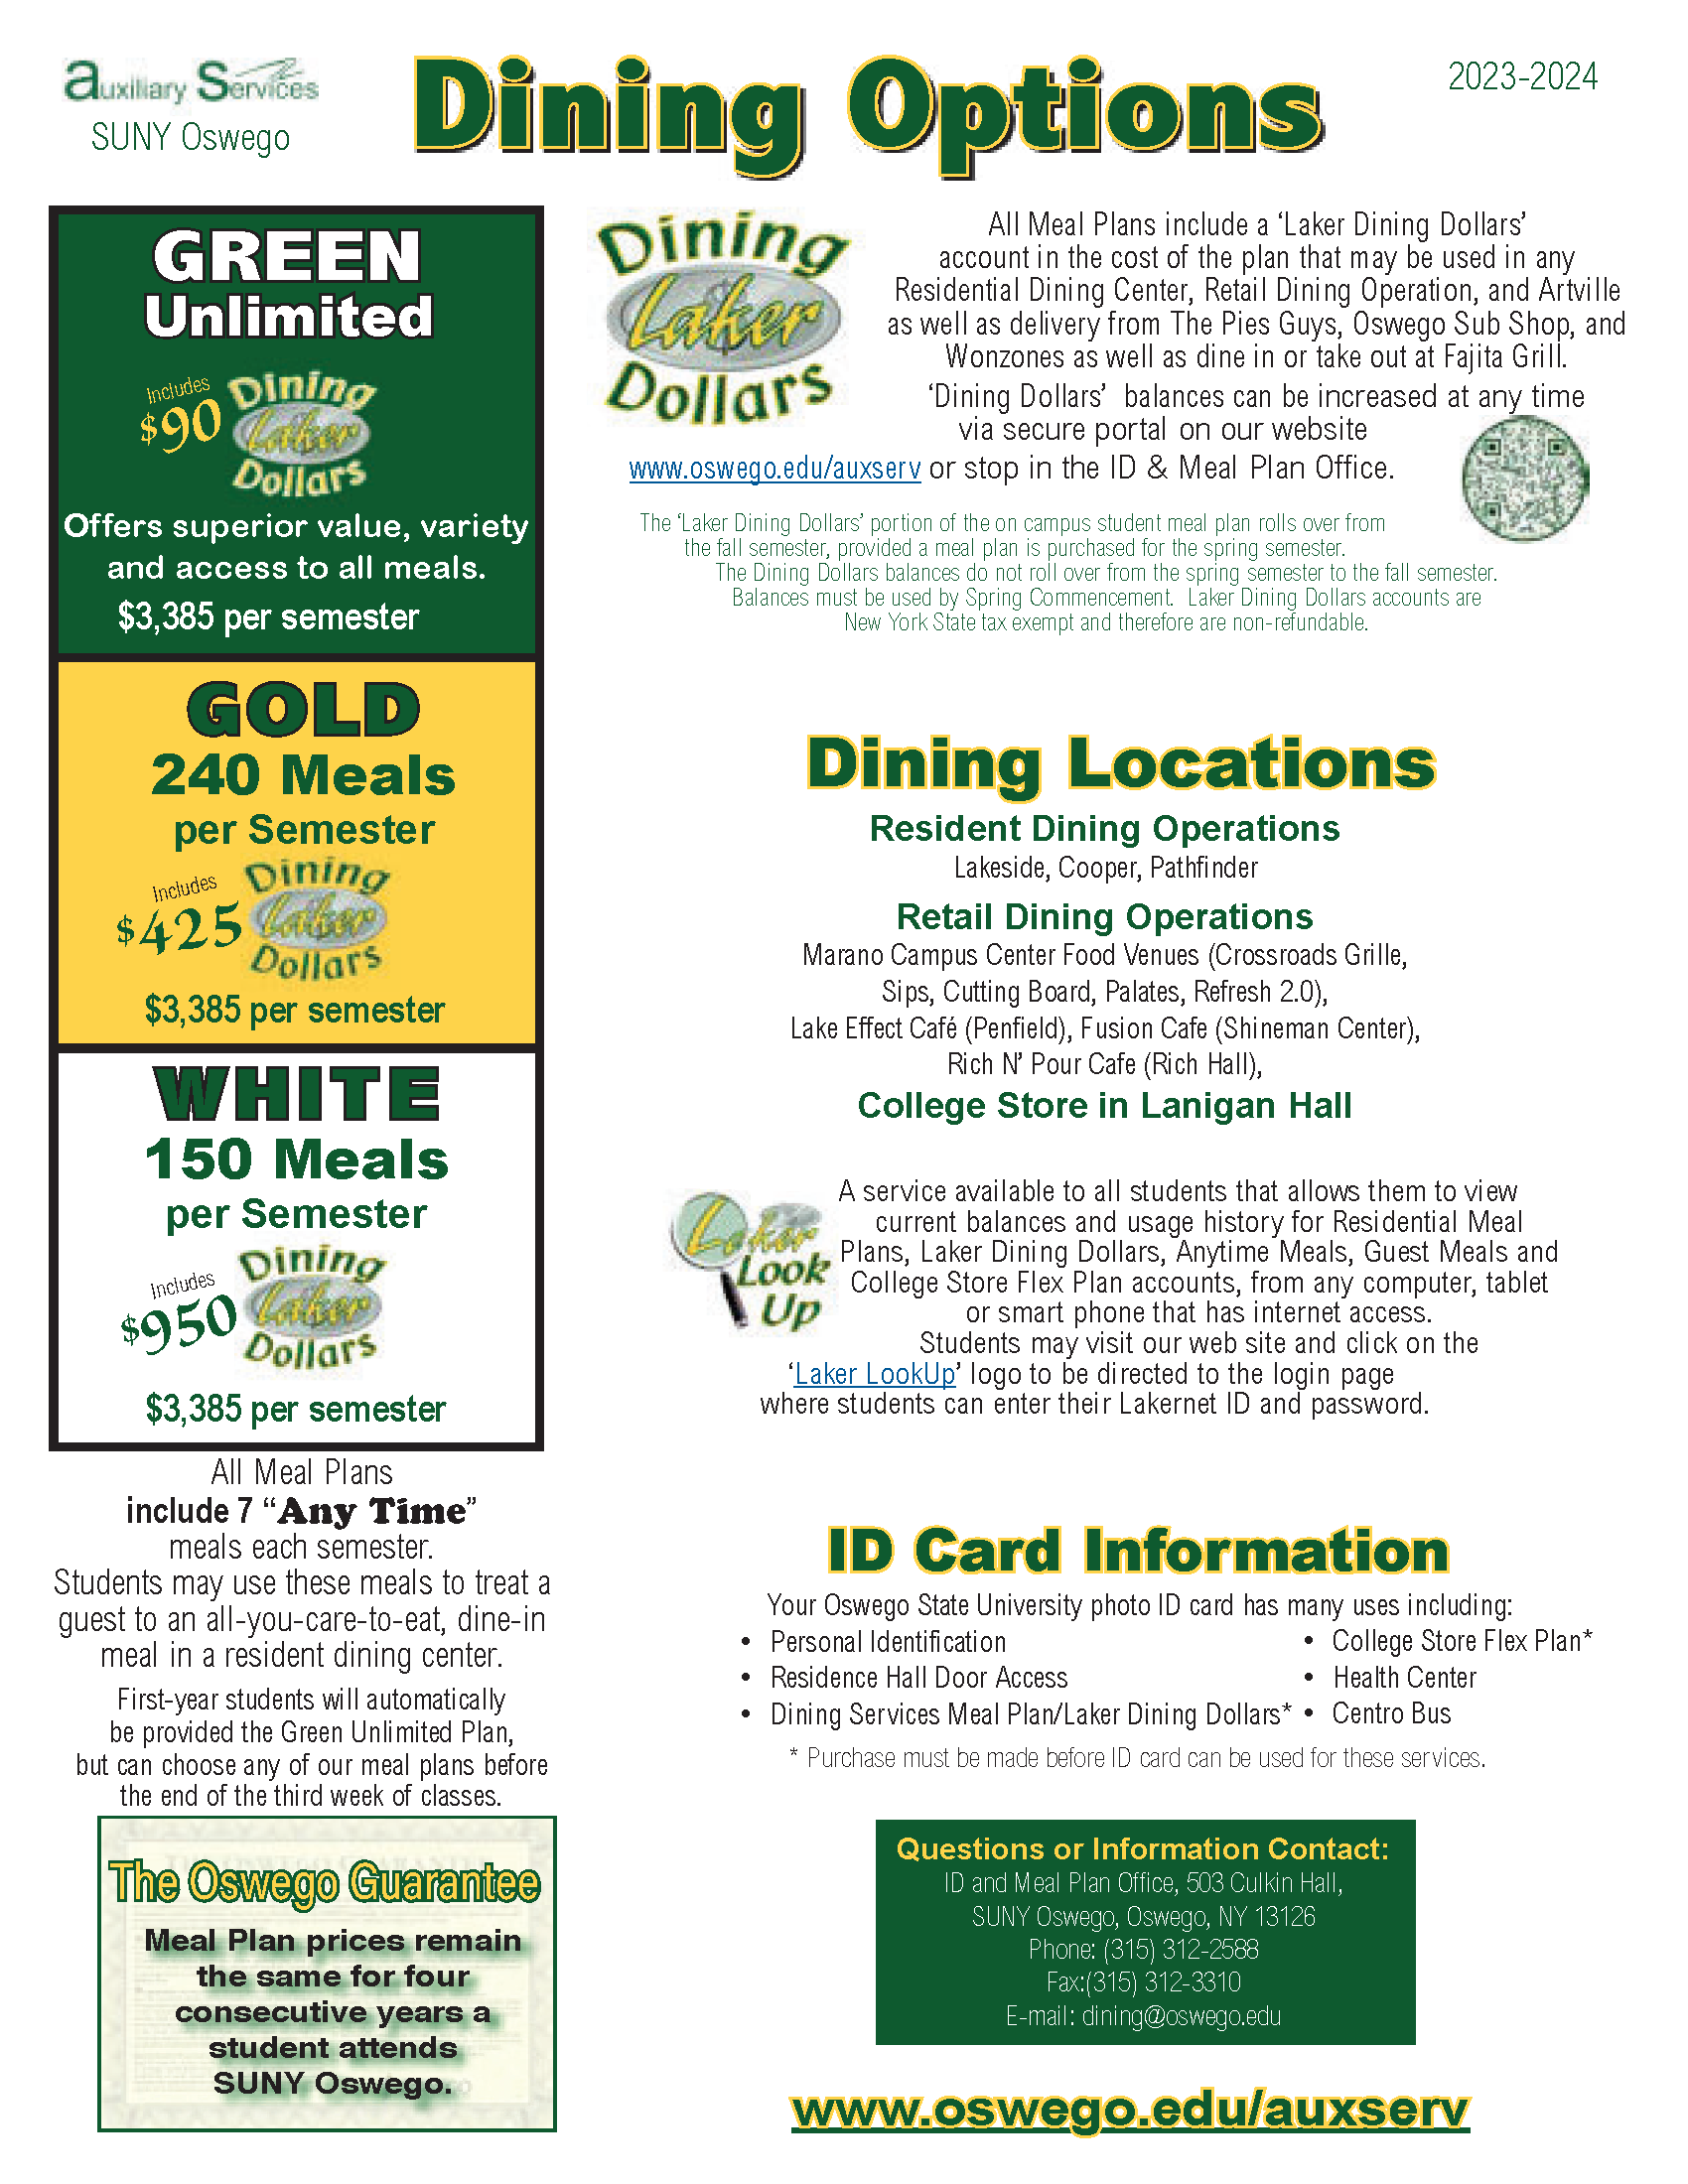 Resident Dining Meal Plan Options Fall 2023 and Spring 2024